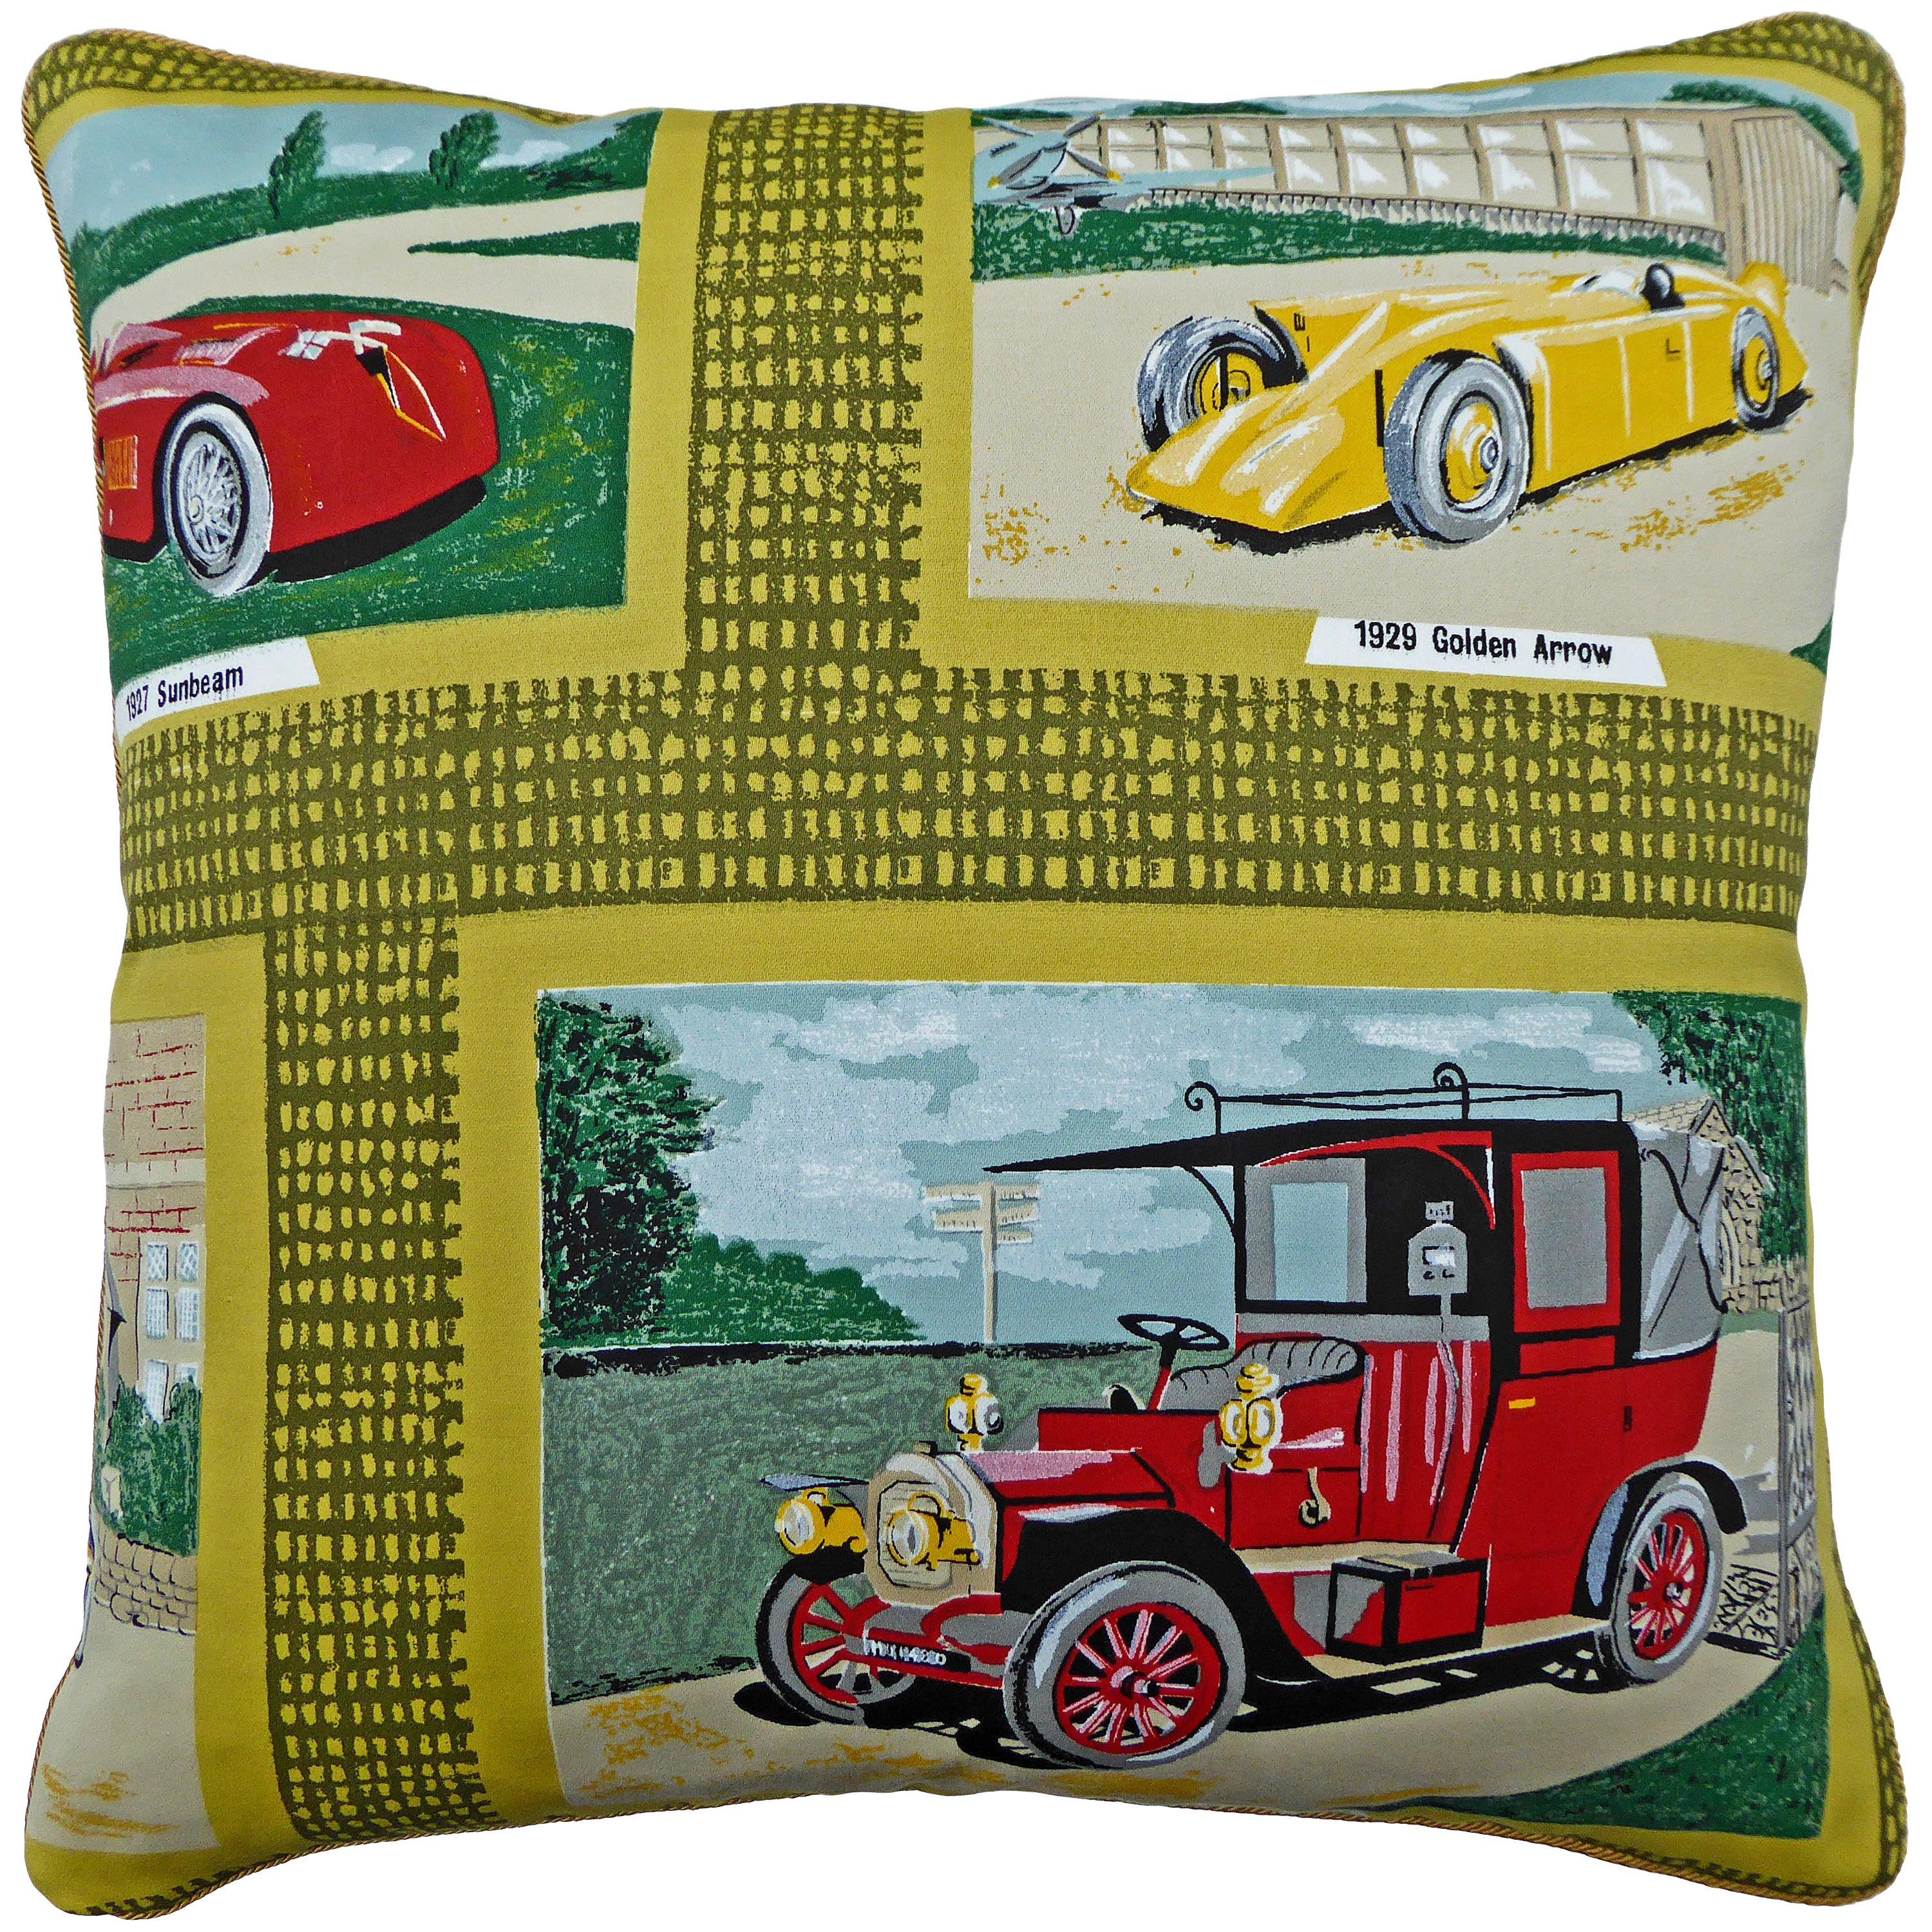 'Vintage Cushions' Luxury Bespoke-Made Pillow '1929 Golden Arrow' Made in London